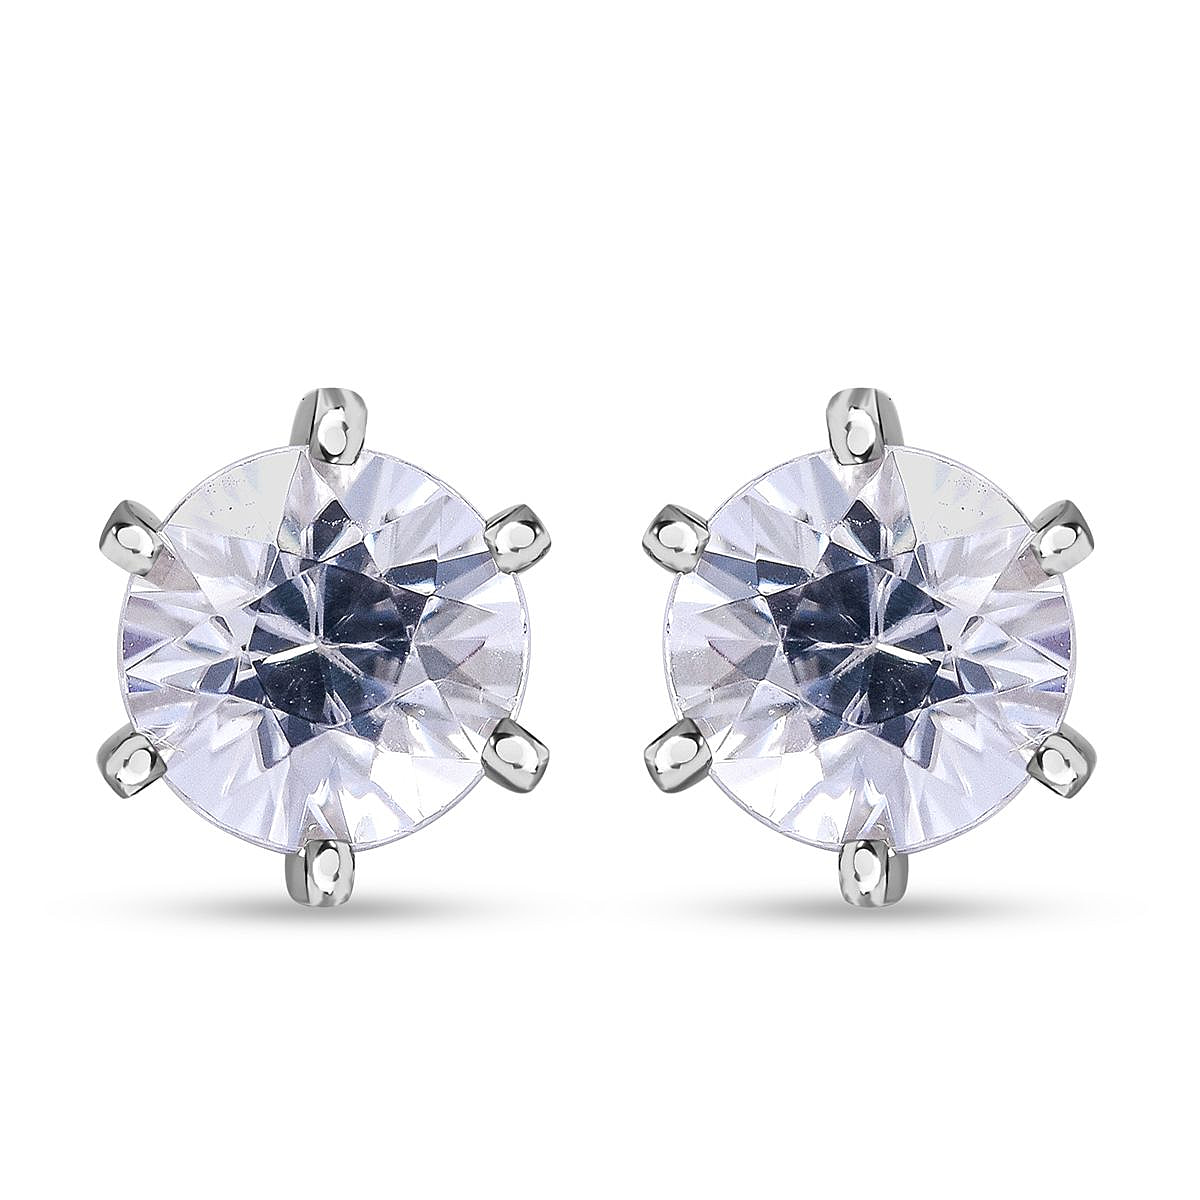 Natural Zircon Solitaire Stud Earrings in Rhodium Overlay Sterling Silver 2.40 Ct.